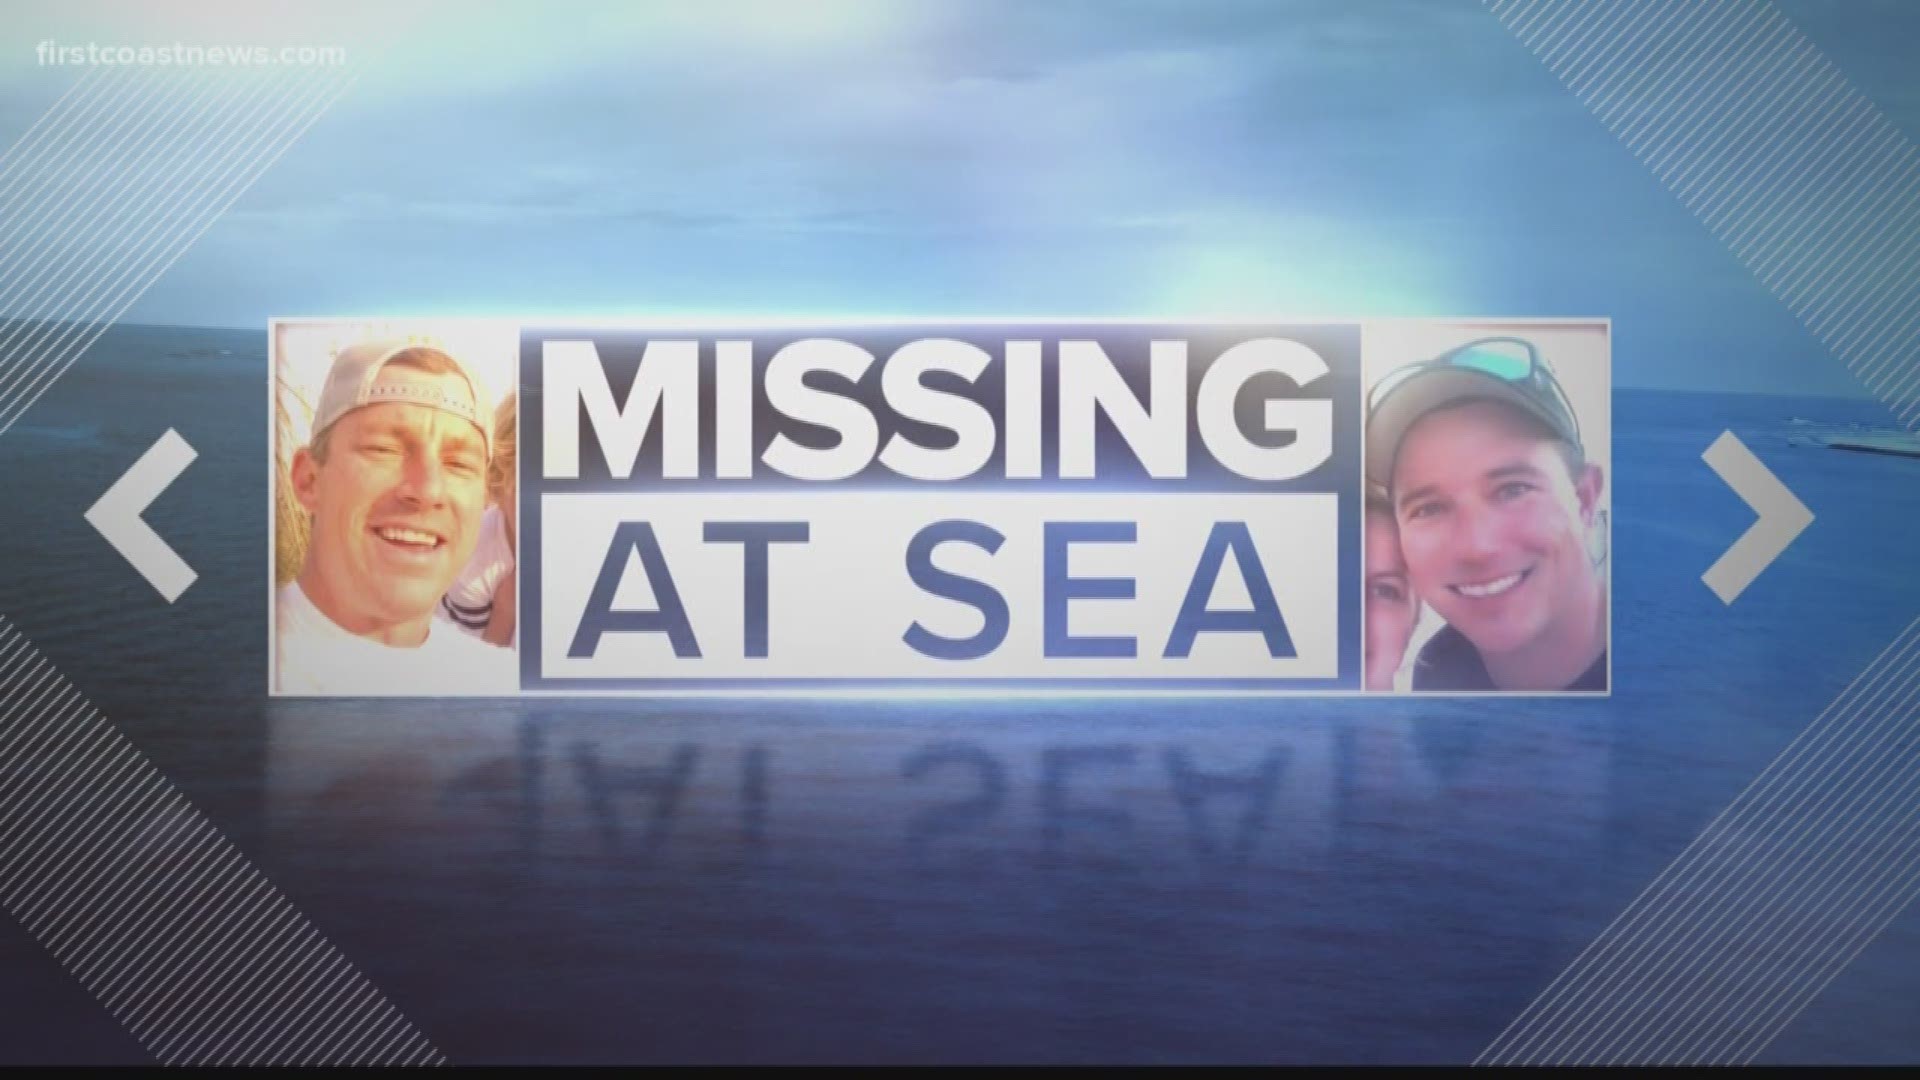 The Jacksonville Fire and Rescue Department and the U.S. Coast Guard gave an update Tuesday on their search for two firefighters who went missing four days ago. The search is still a rescue mission, they said.